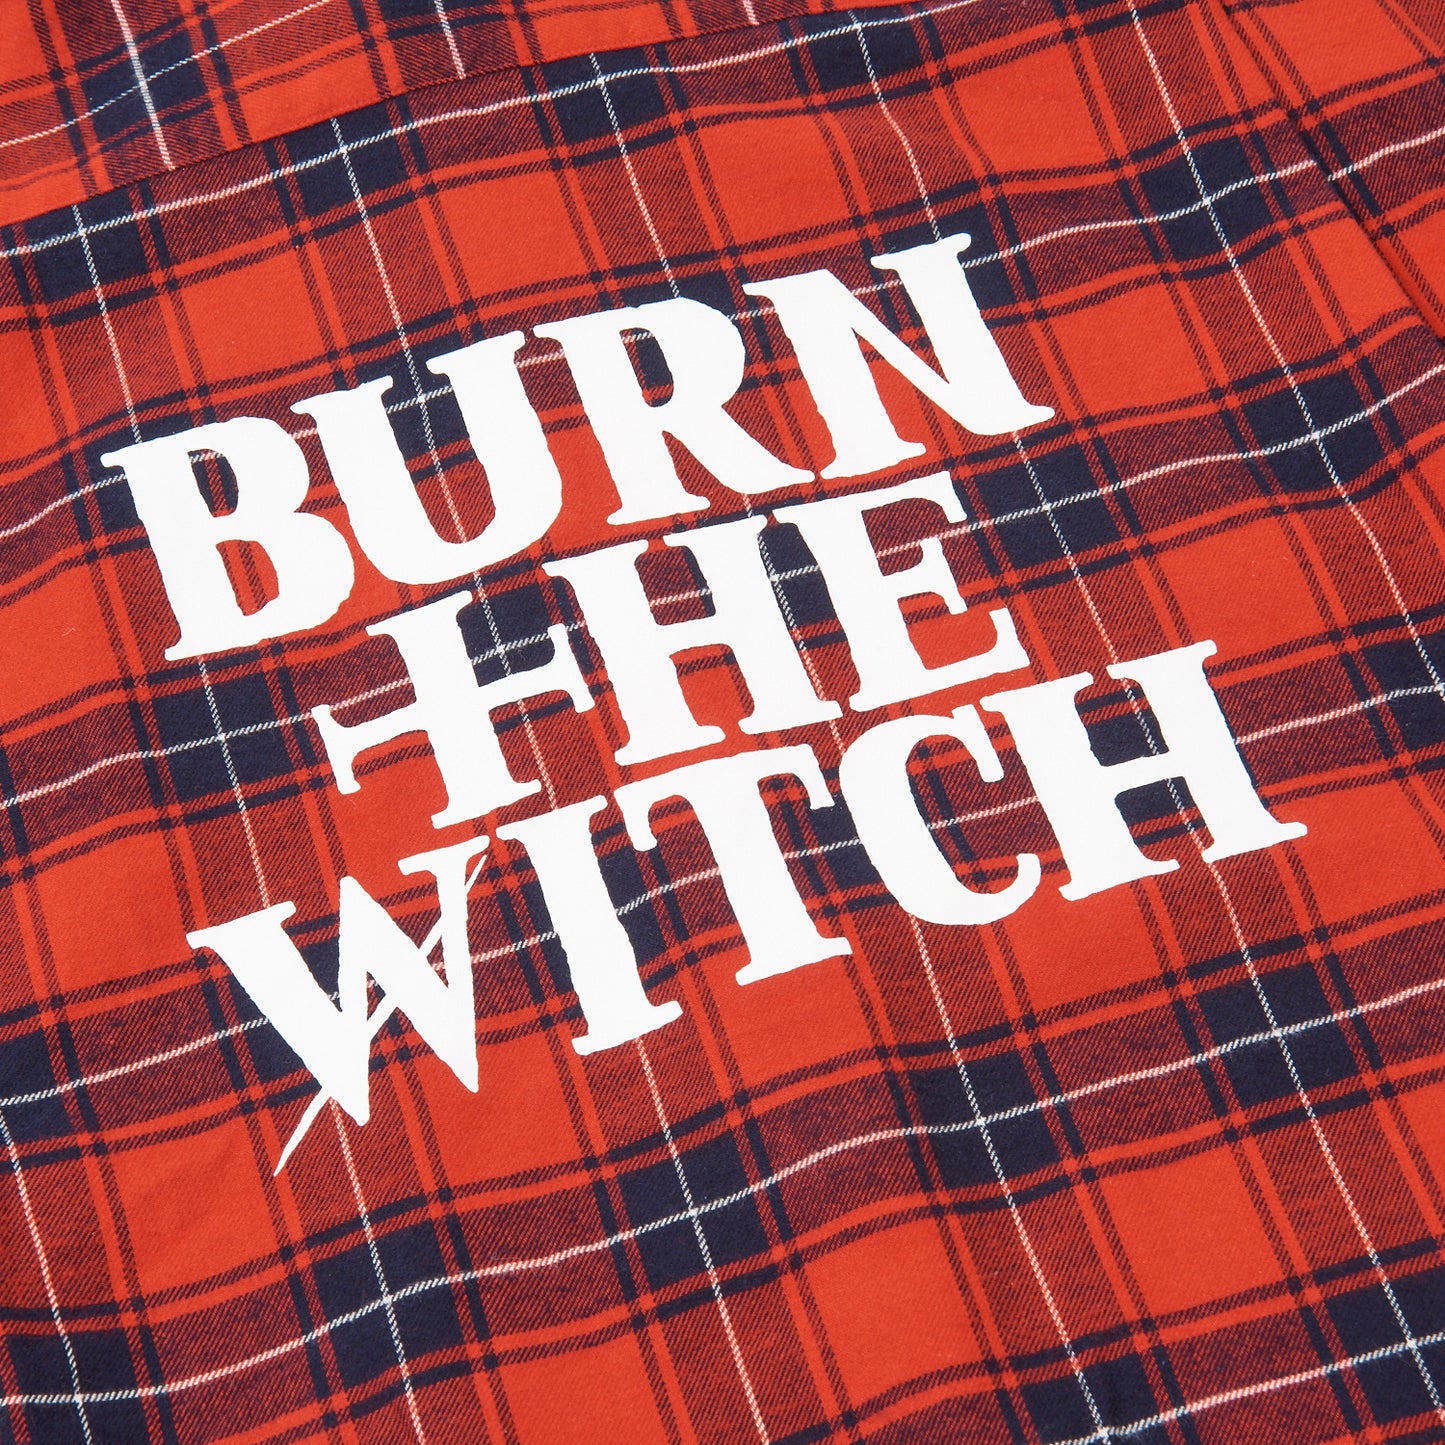 『BURN THE WITCH』チェックシャツ （全1種）